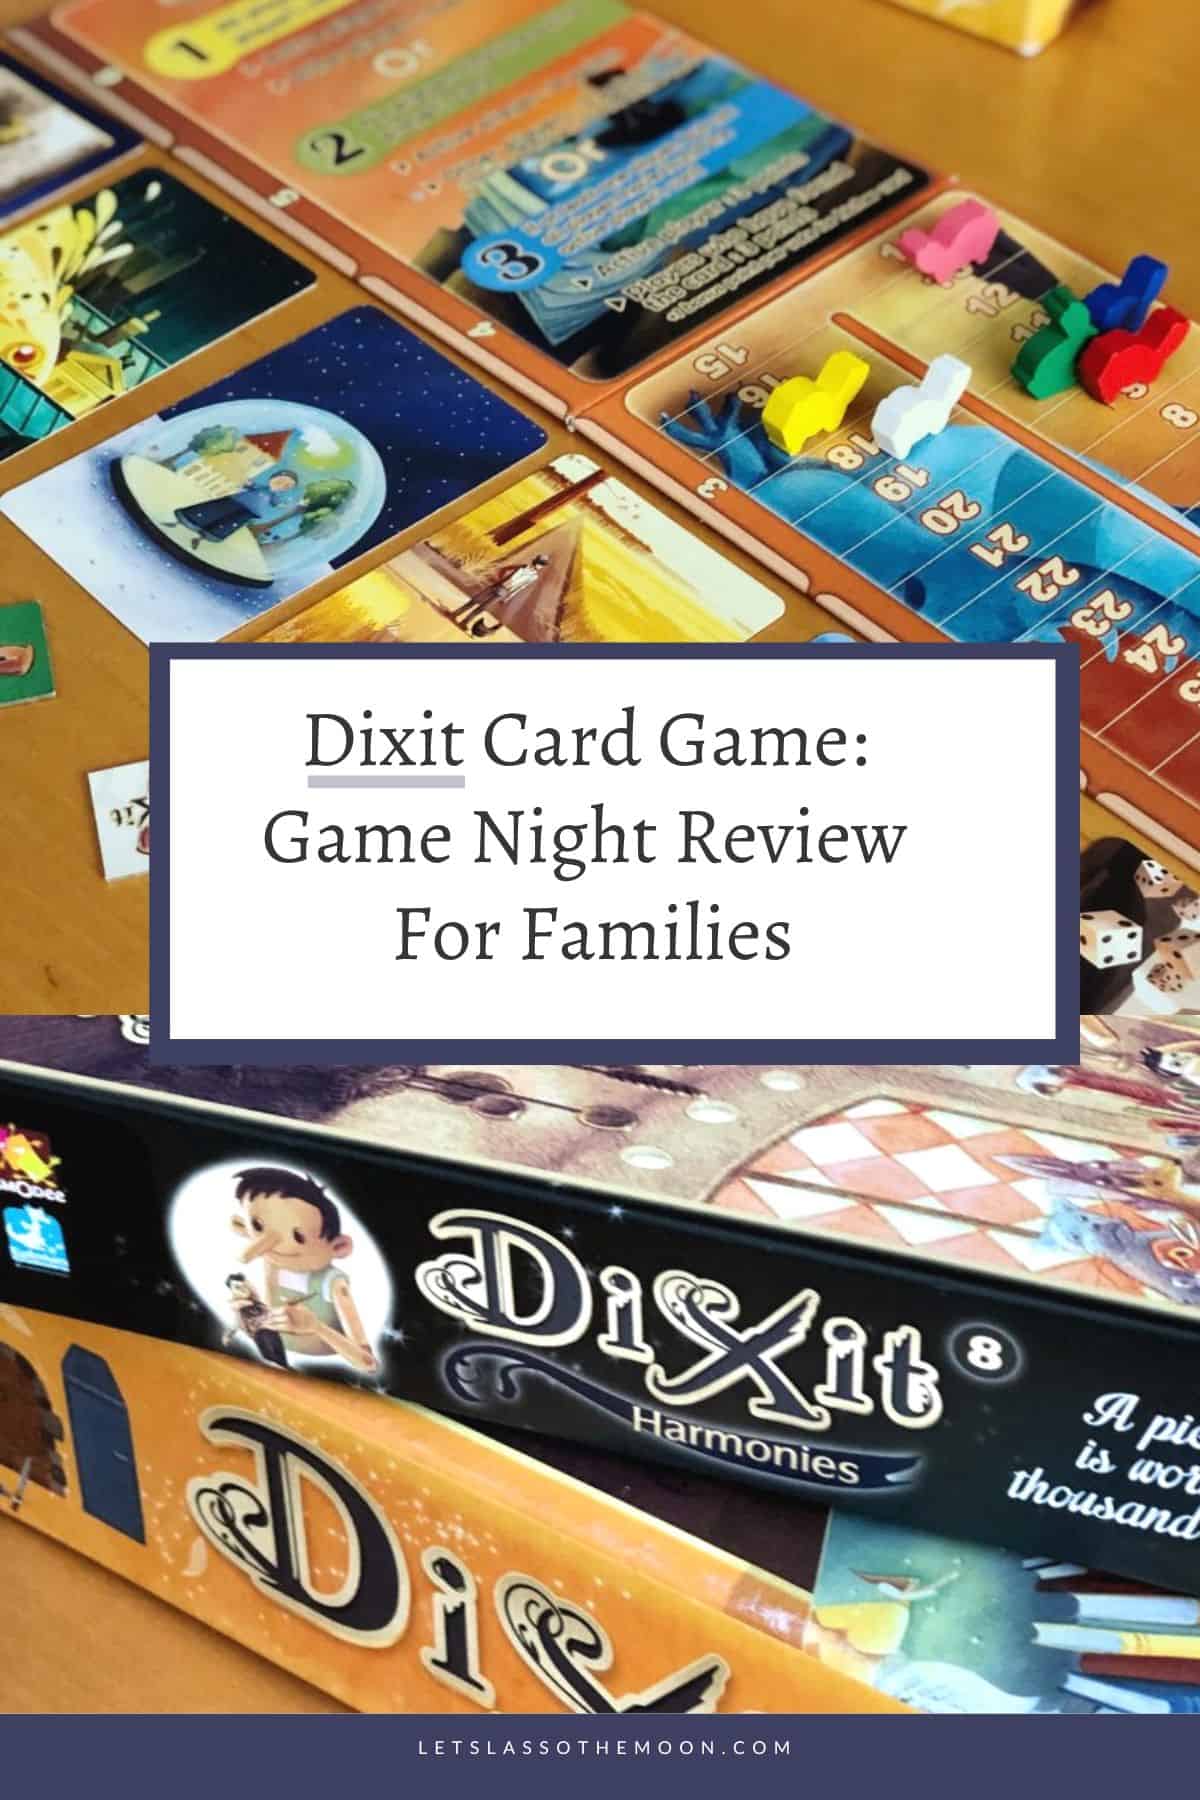 A collage with the post headline and images of the Dixit game set-up for play.